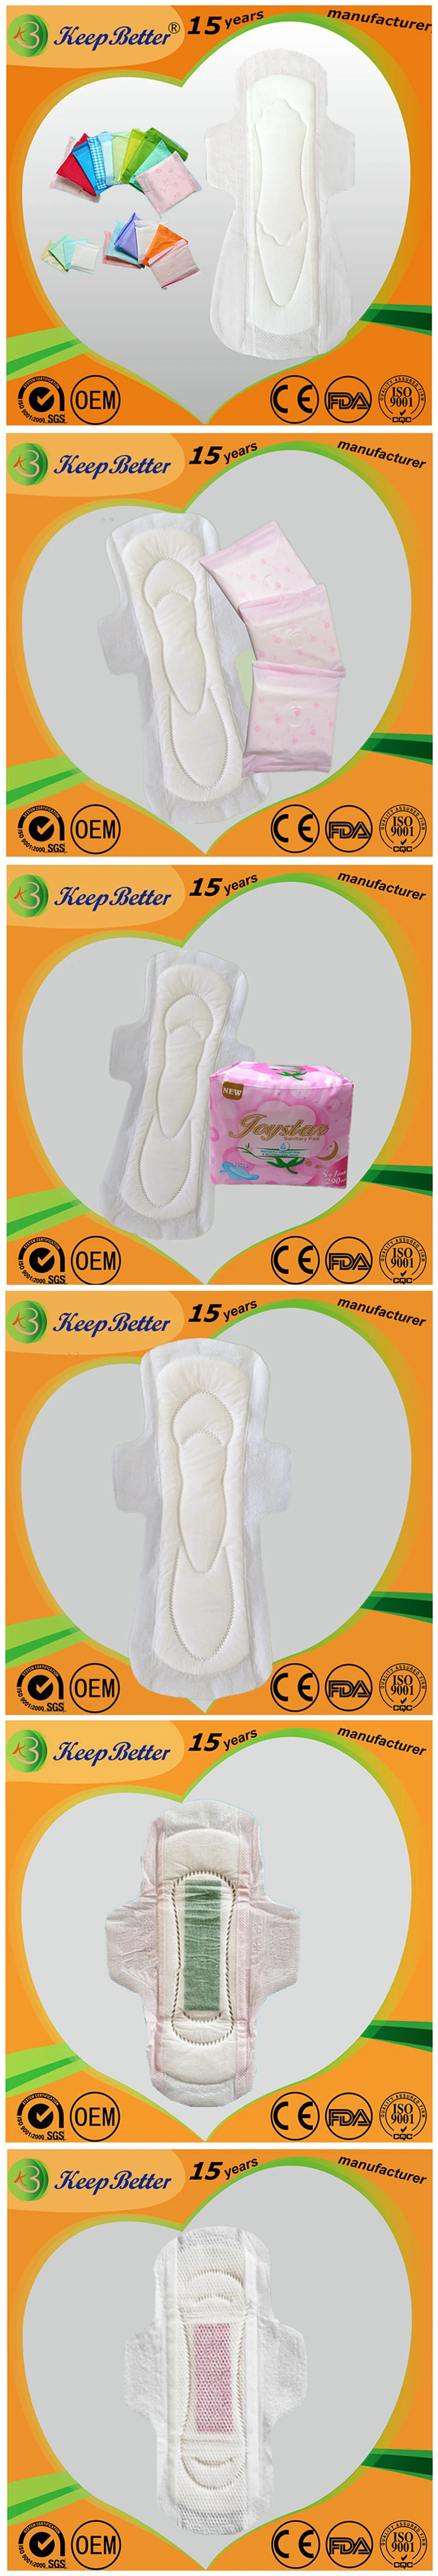 Female Cotton Sanitary Pads, Lady Personal Care Lady Pad Napkins